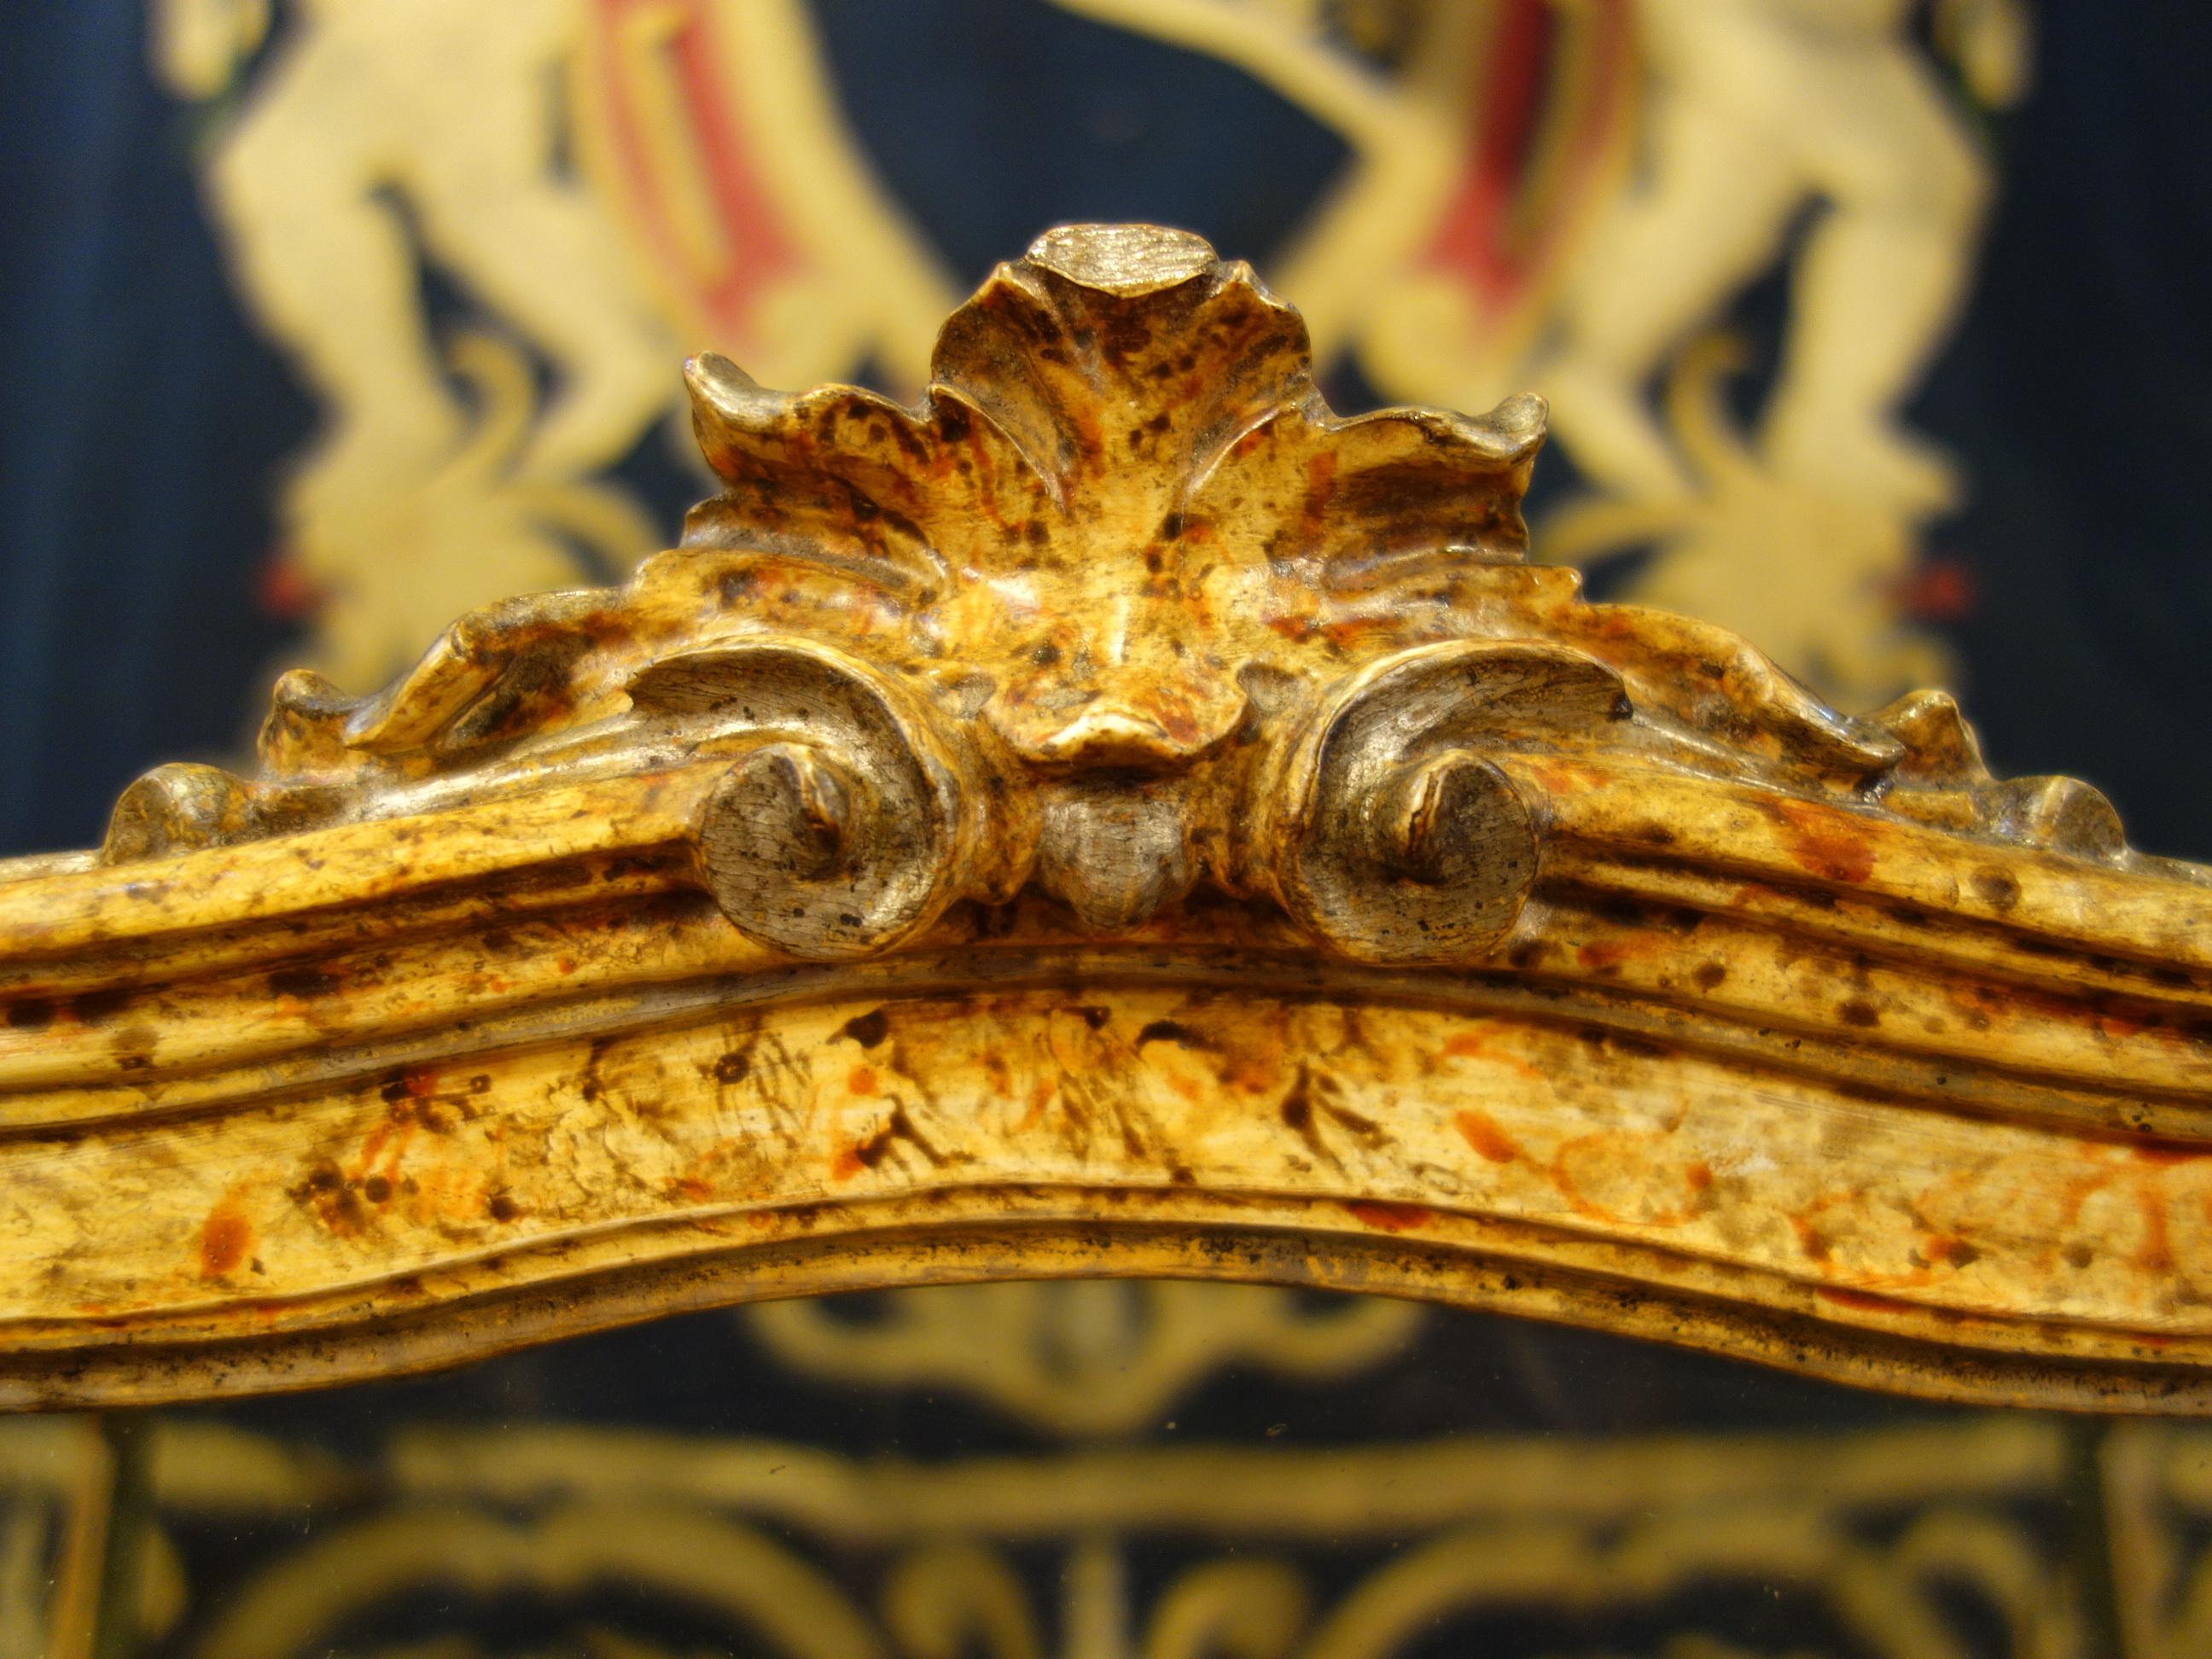 An elegantly detailed, late 18th century Louis XV period wooden display case, golden yellow lacquer with silver leaf accents. As a reliquary or tabernacolo, the box may have been used to display or store religious artifacts, as a shrine. Single